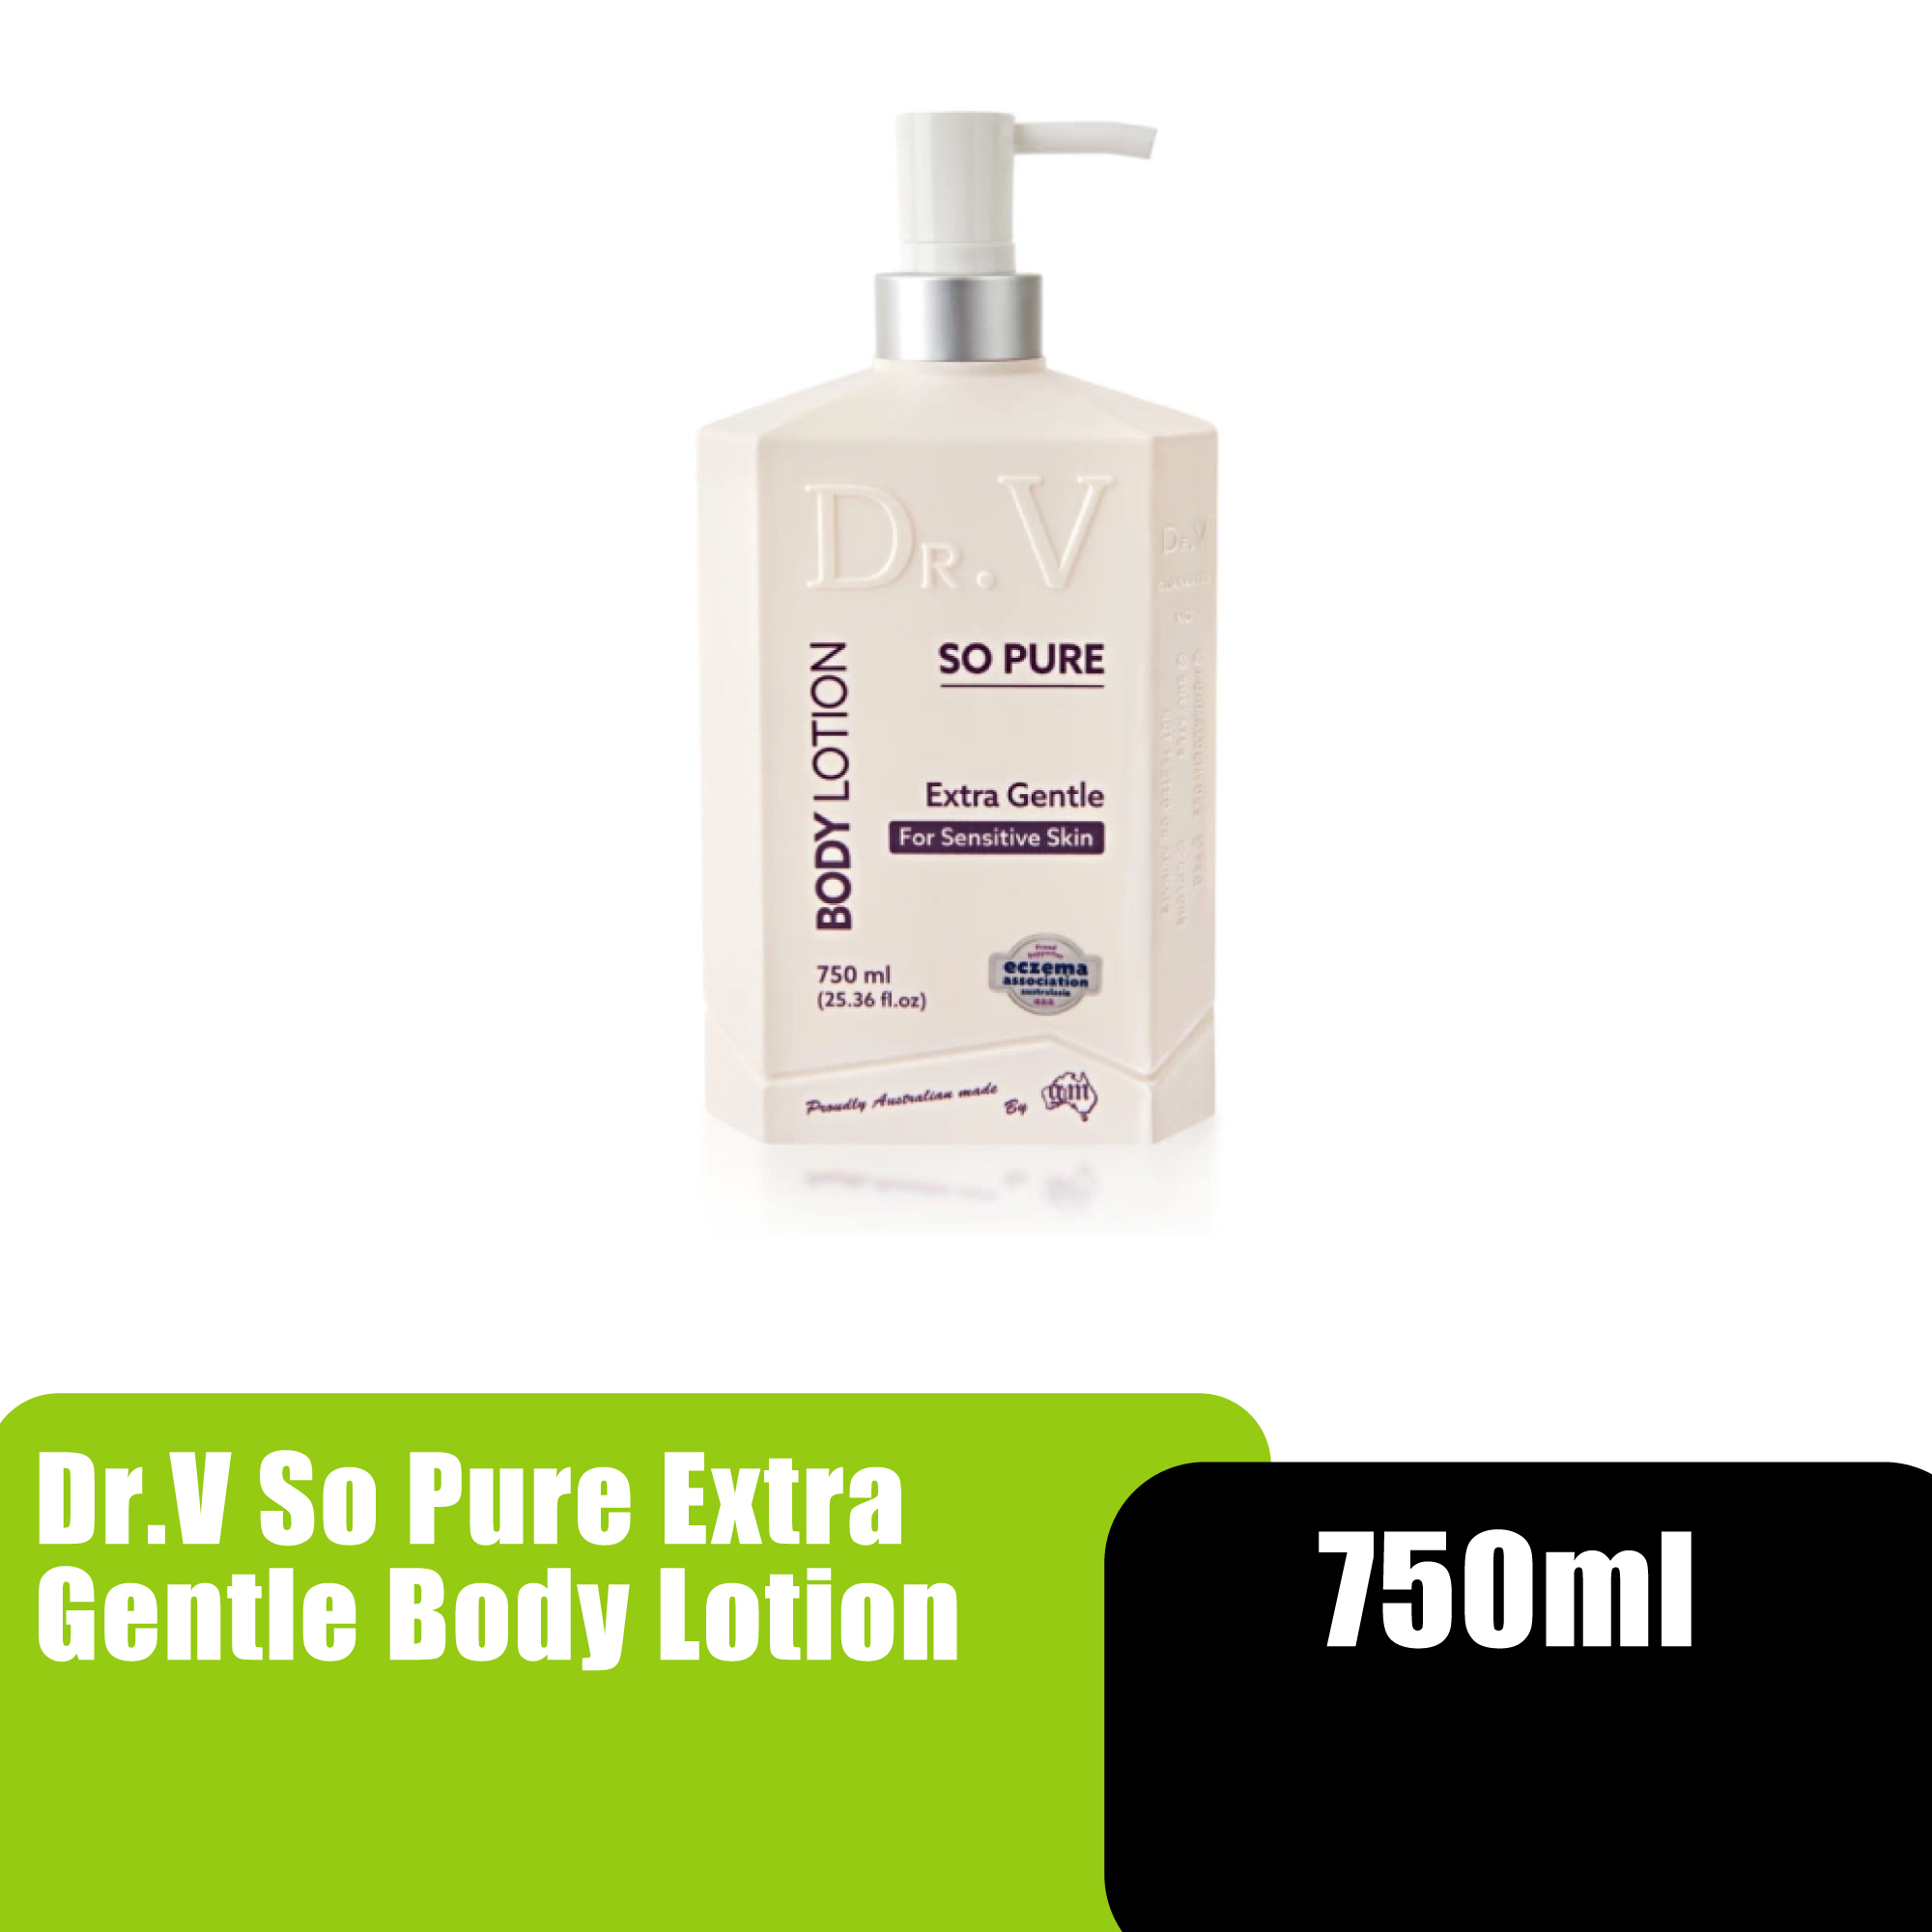 Dr.V So Pure Extra Gentle Hydrating Lotion, Skin Lotion, Moisturizer Lotion Sensitive Skin, Soothing Lotion (身體乳) 750ml